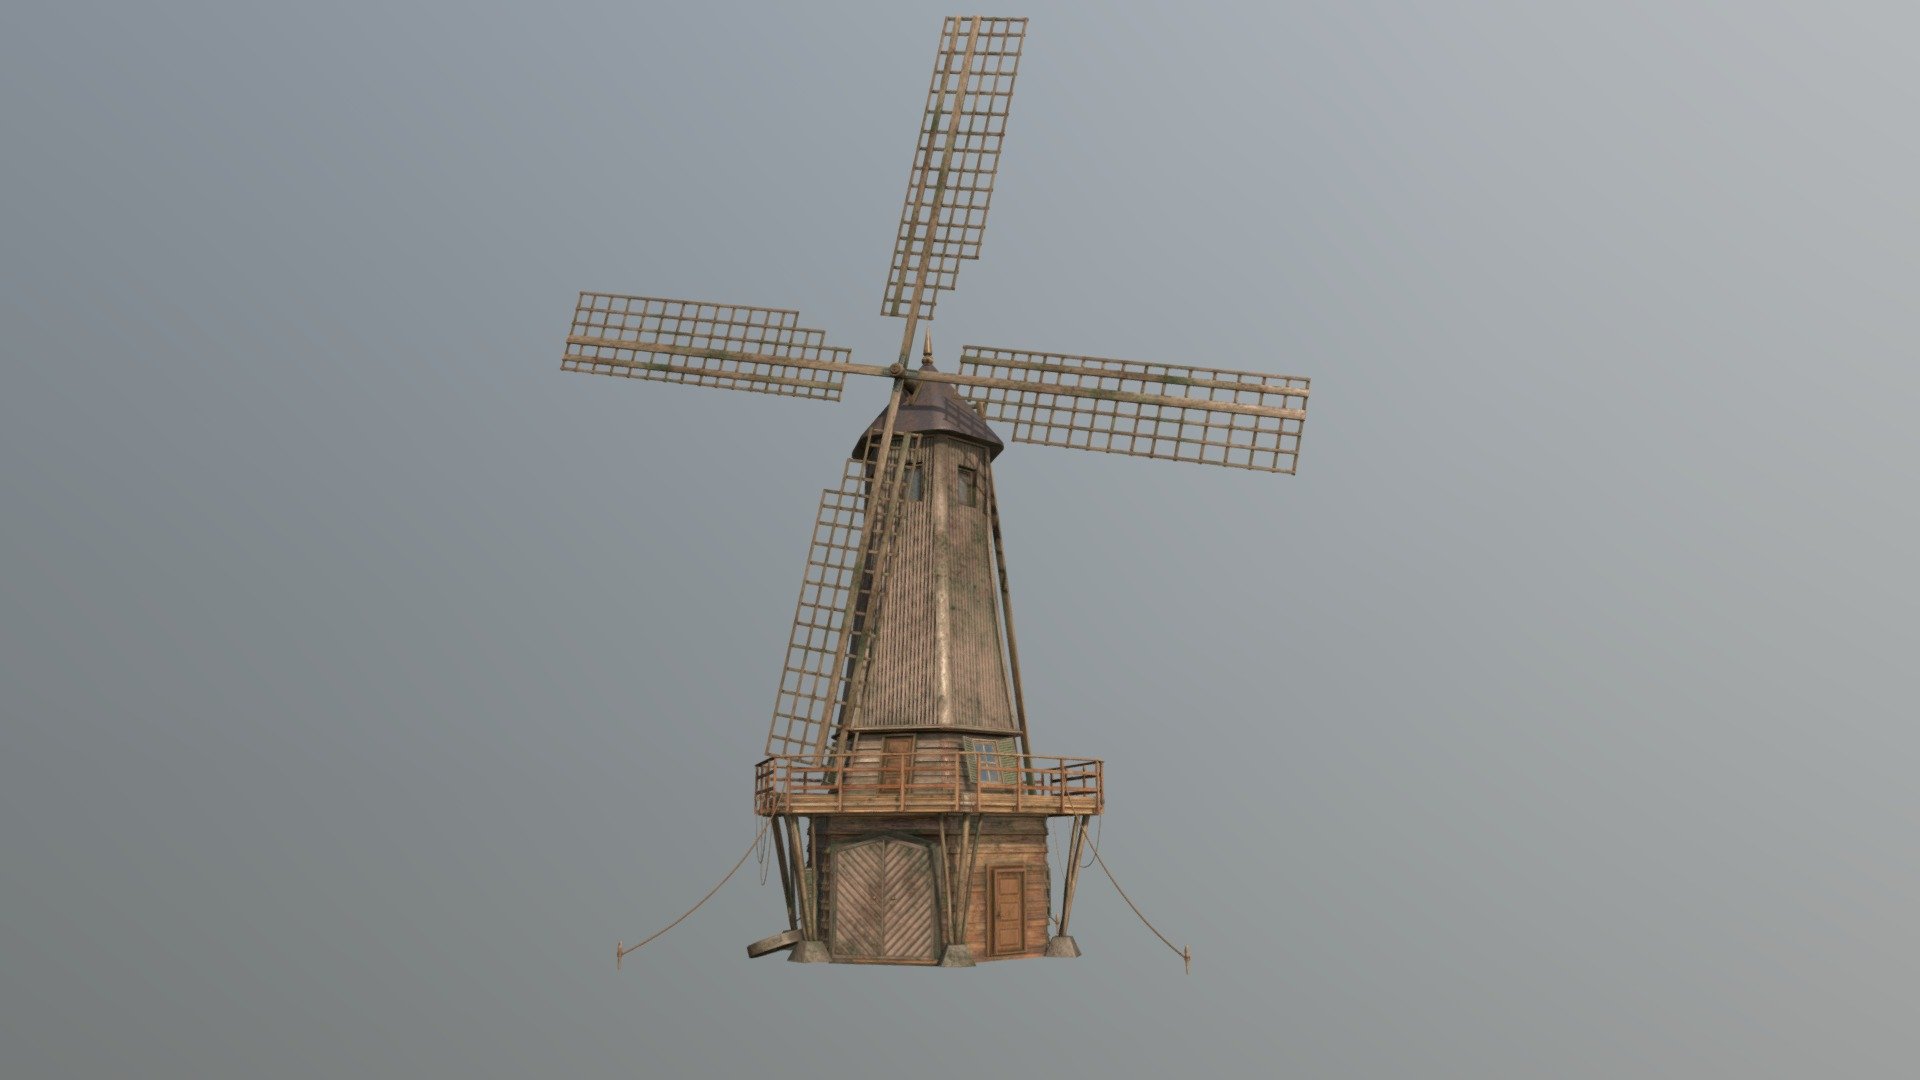 Windmill 
plug and play
gizmos ready for animation
All handmade textures too Substance painter.
Easy to make own game 3d model